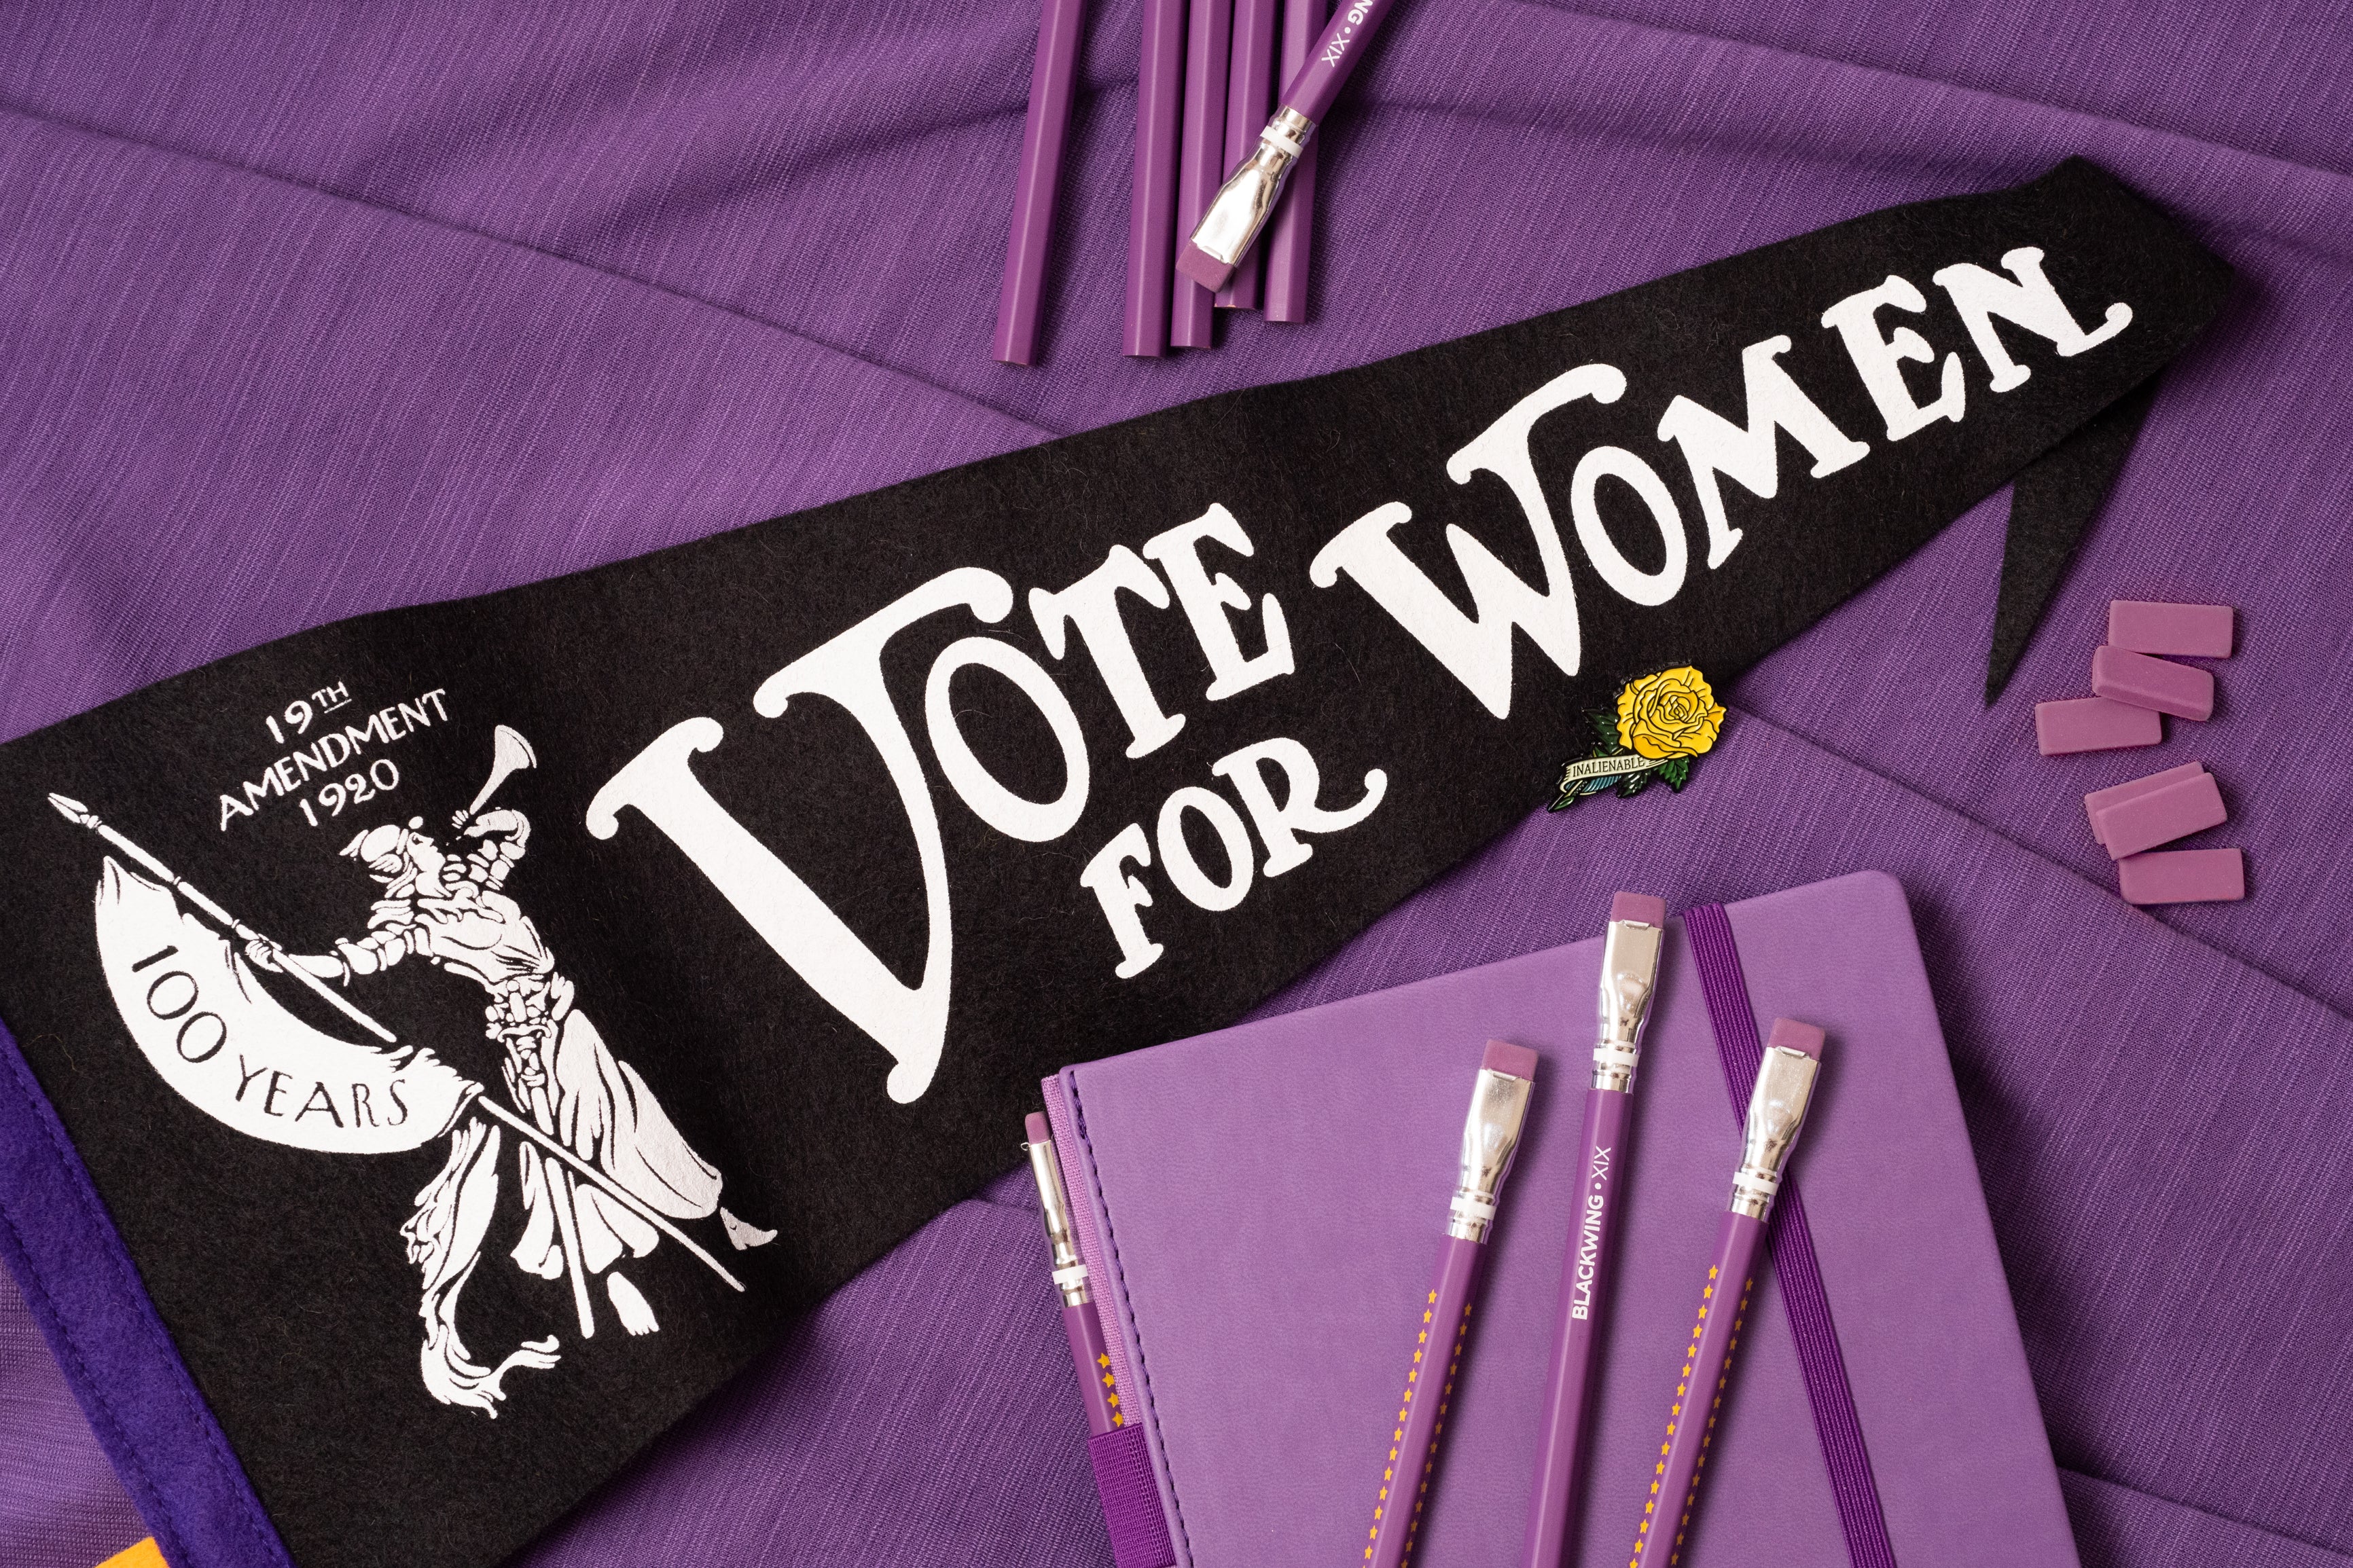 A limited edition Blackwing XIX “Vote for Women” Pennant alongside symbols of women's suffrage, a commemorative badge, and Blackwing XIX purple-themed stationery arranged on a purple background